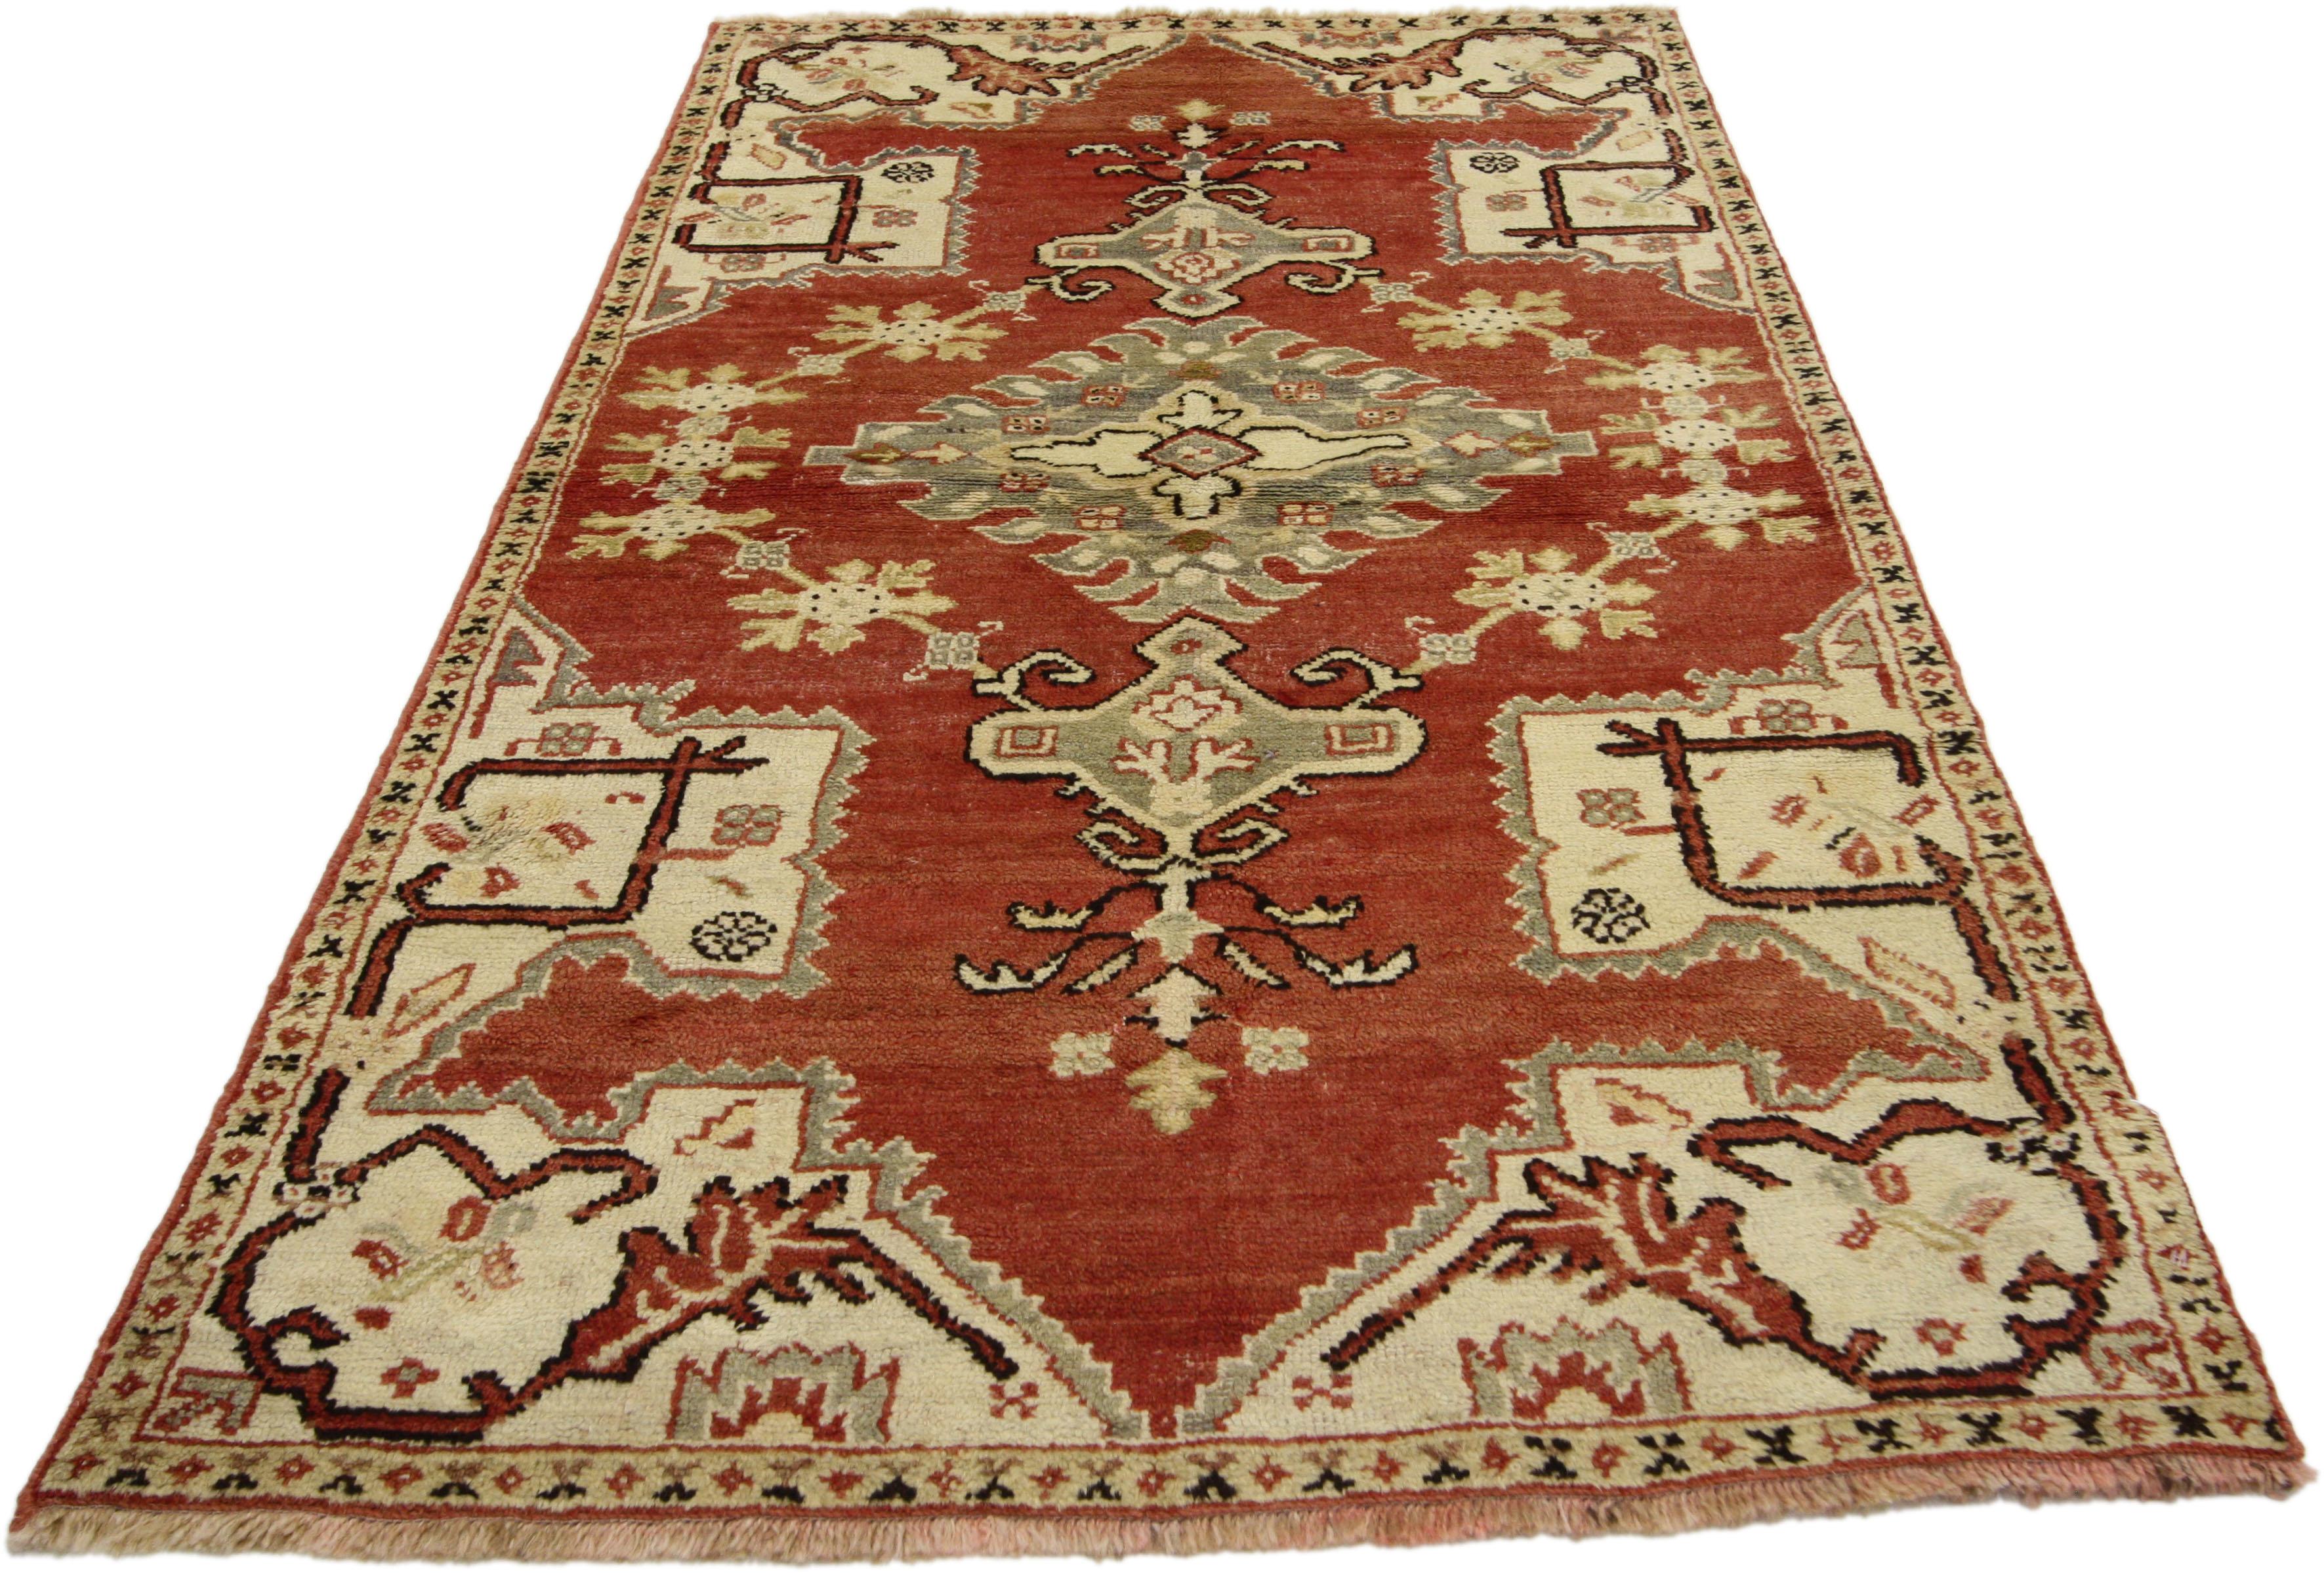 73934, vintage Turkish Oushak Accent rug, entry or foyer rug. This vintage Turkish Oushak rug features a modern traditional style. Immersed in Anatolian history and refined colors, this vintage Oushak rug combines simplicity with sophistication.